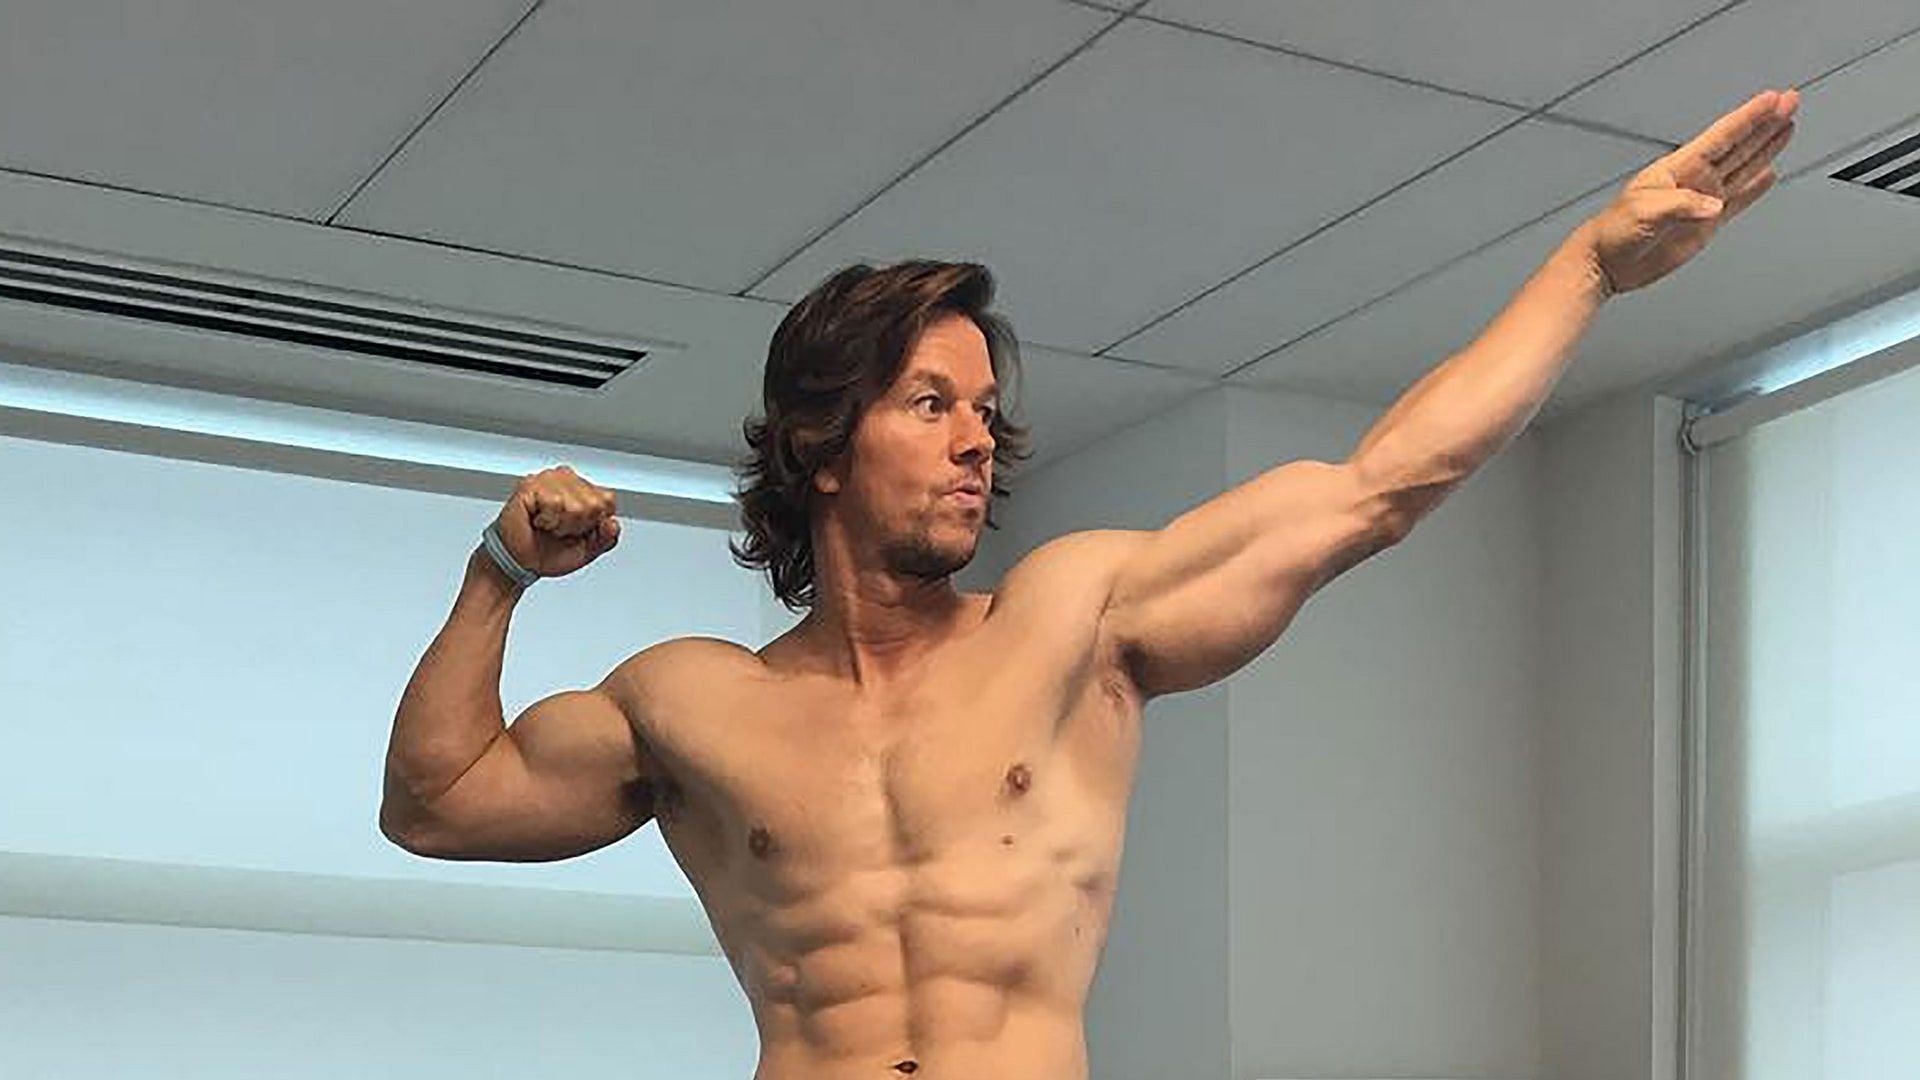 Build abs like Mark Wahlberg with a few exercises.